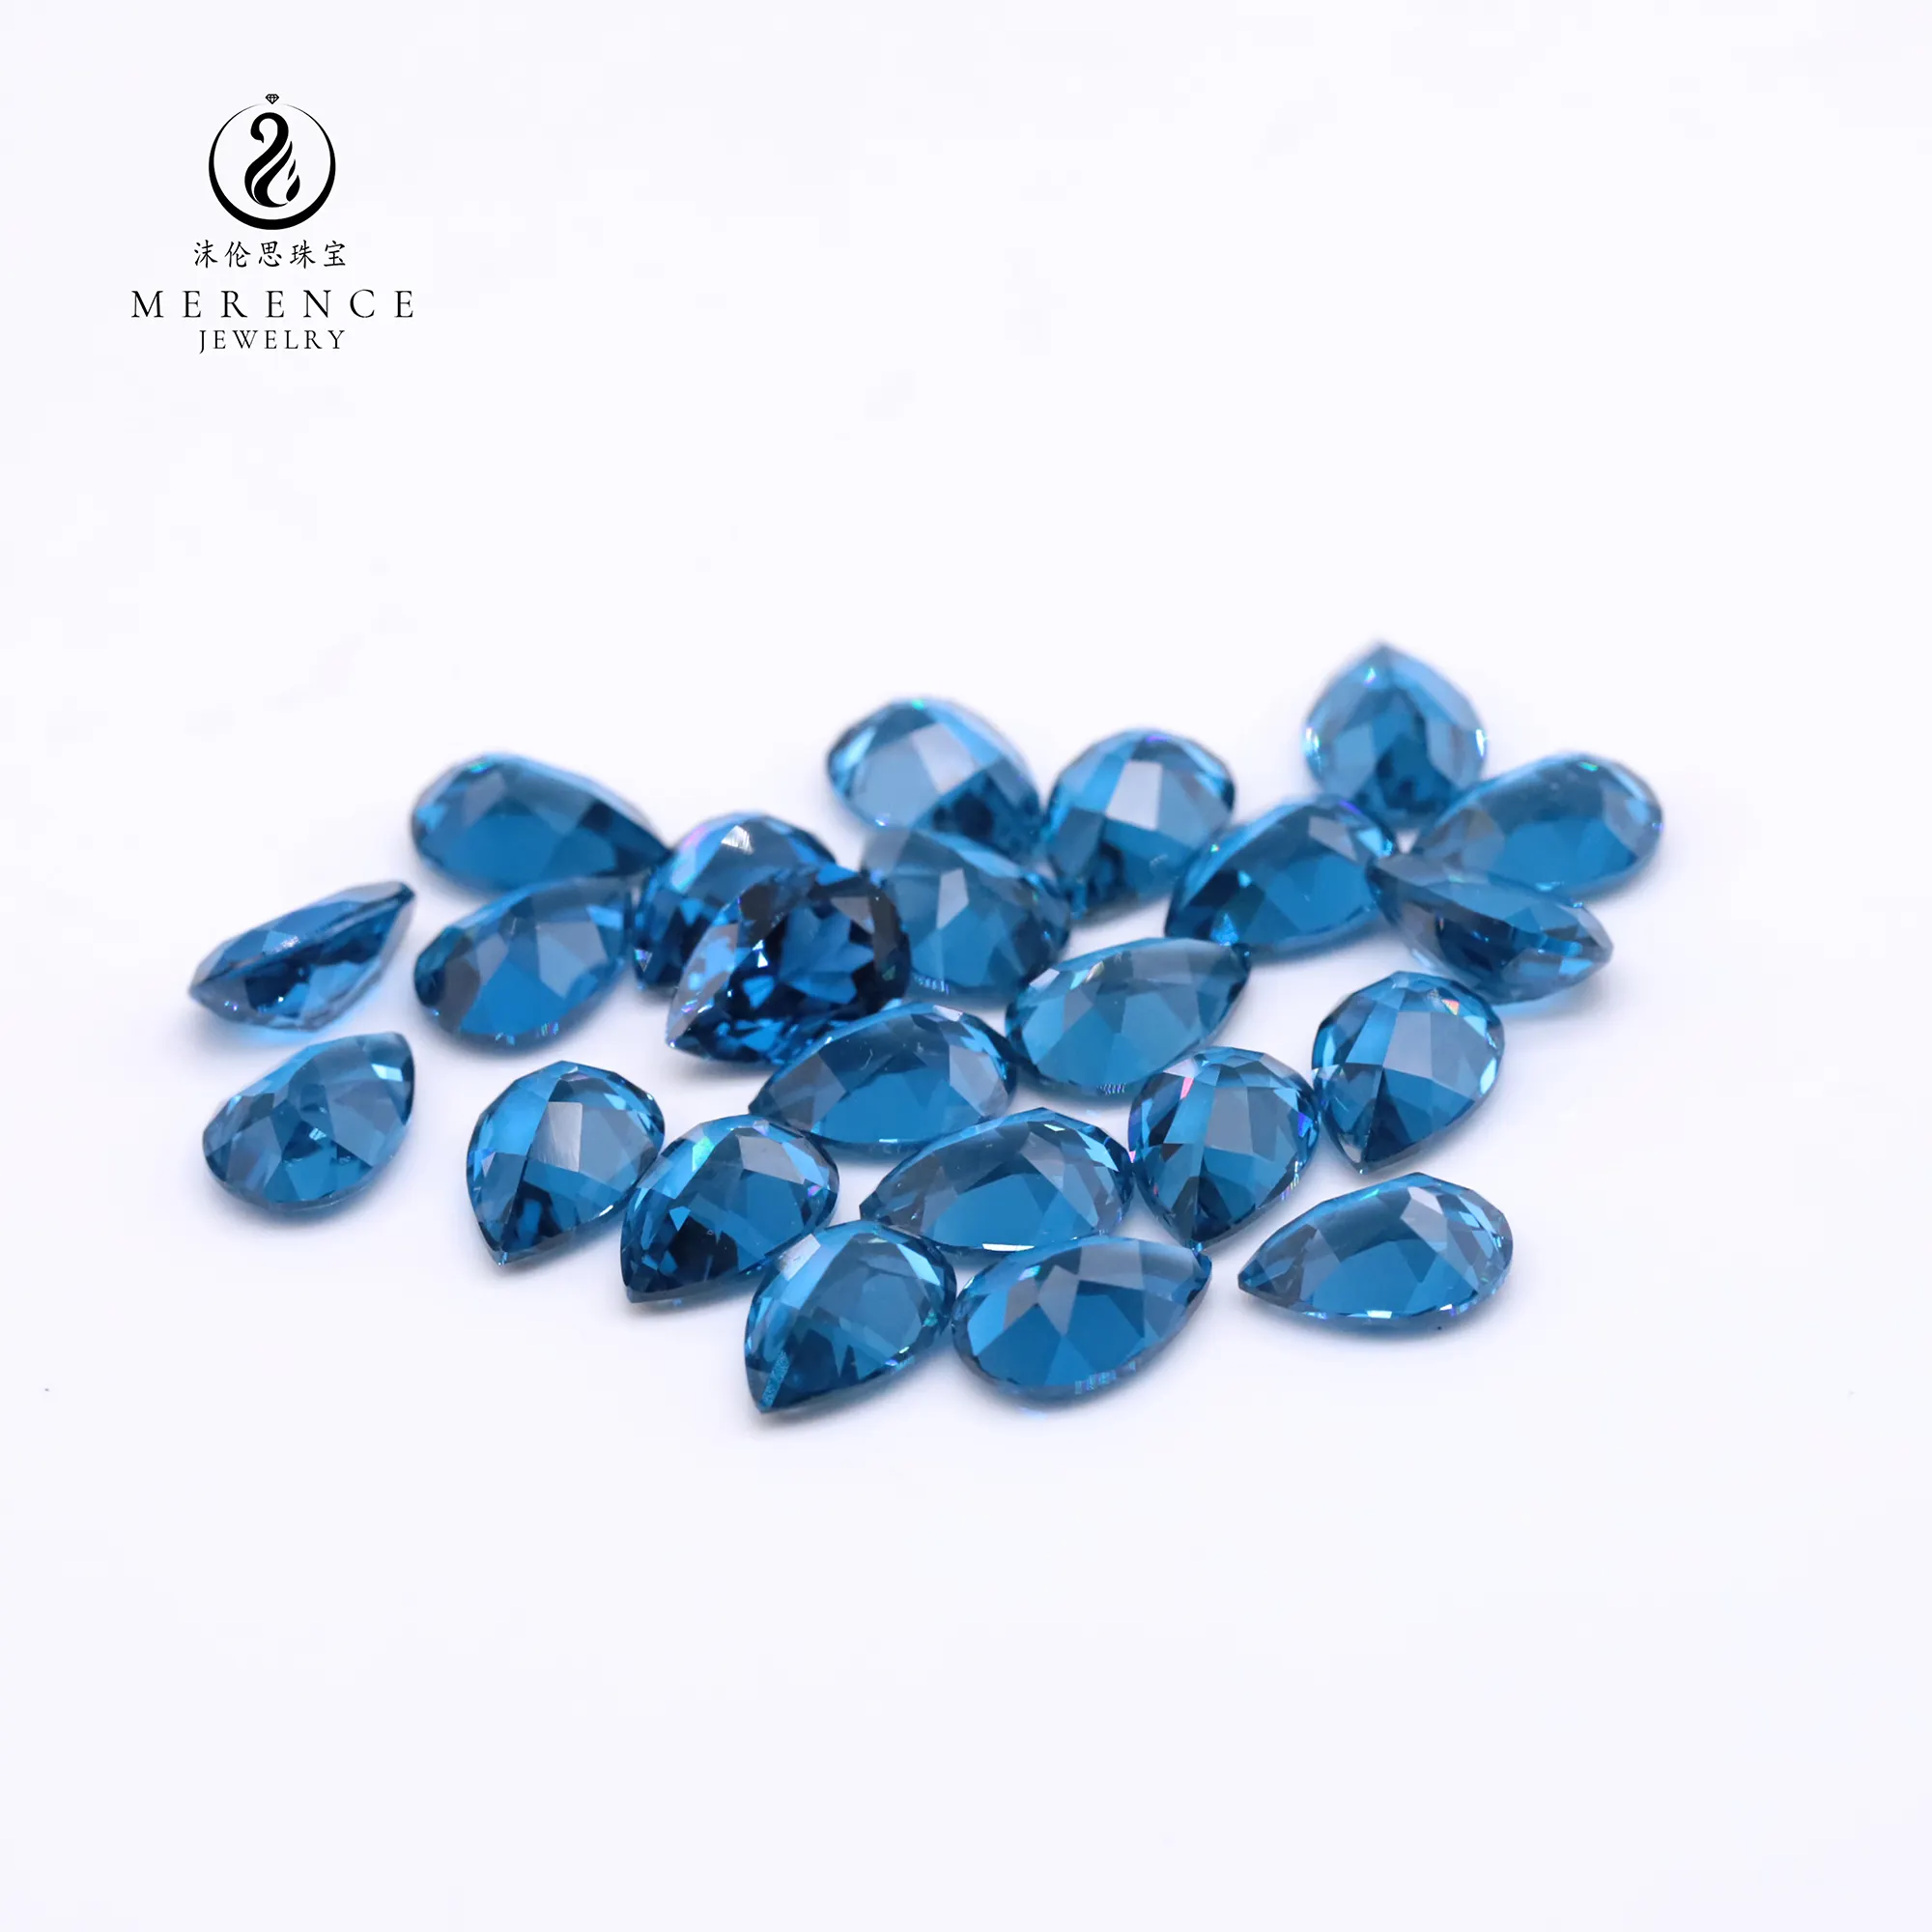 Merence Jewelry Loose Aquamarine Blue Stone Pear Cut Spinel 119# Gemstone Spinel For Jewelry